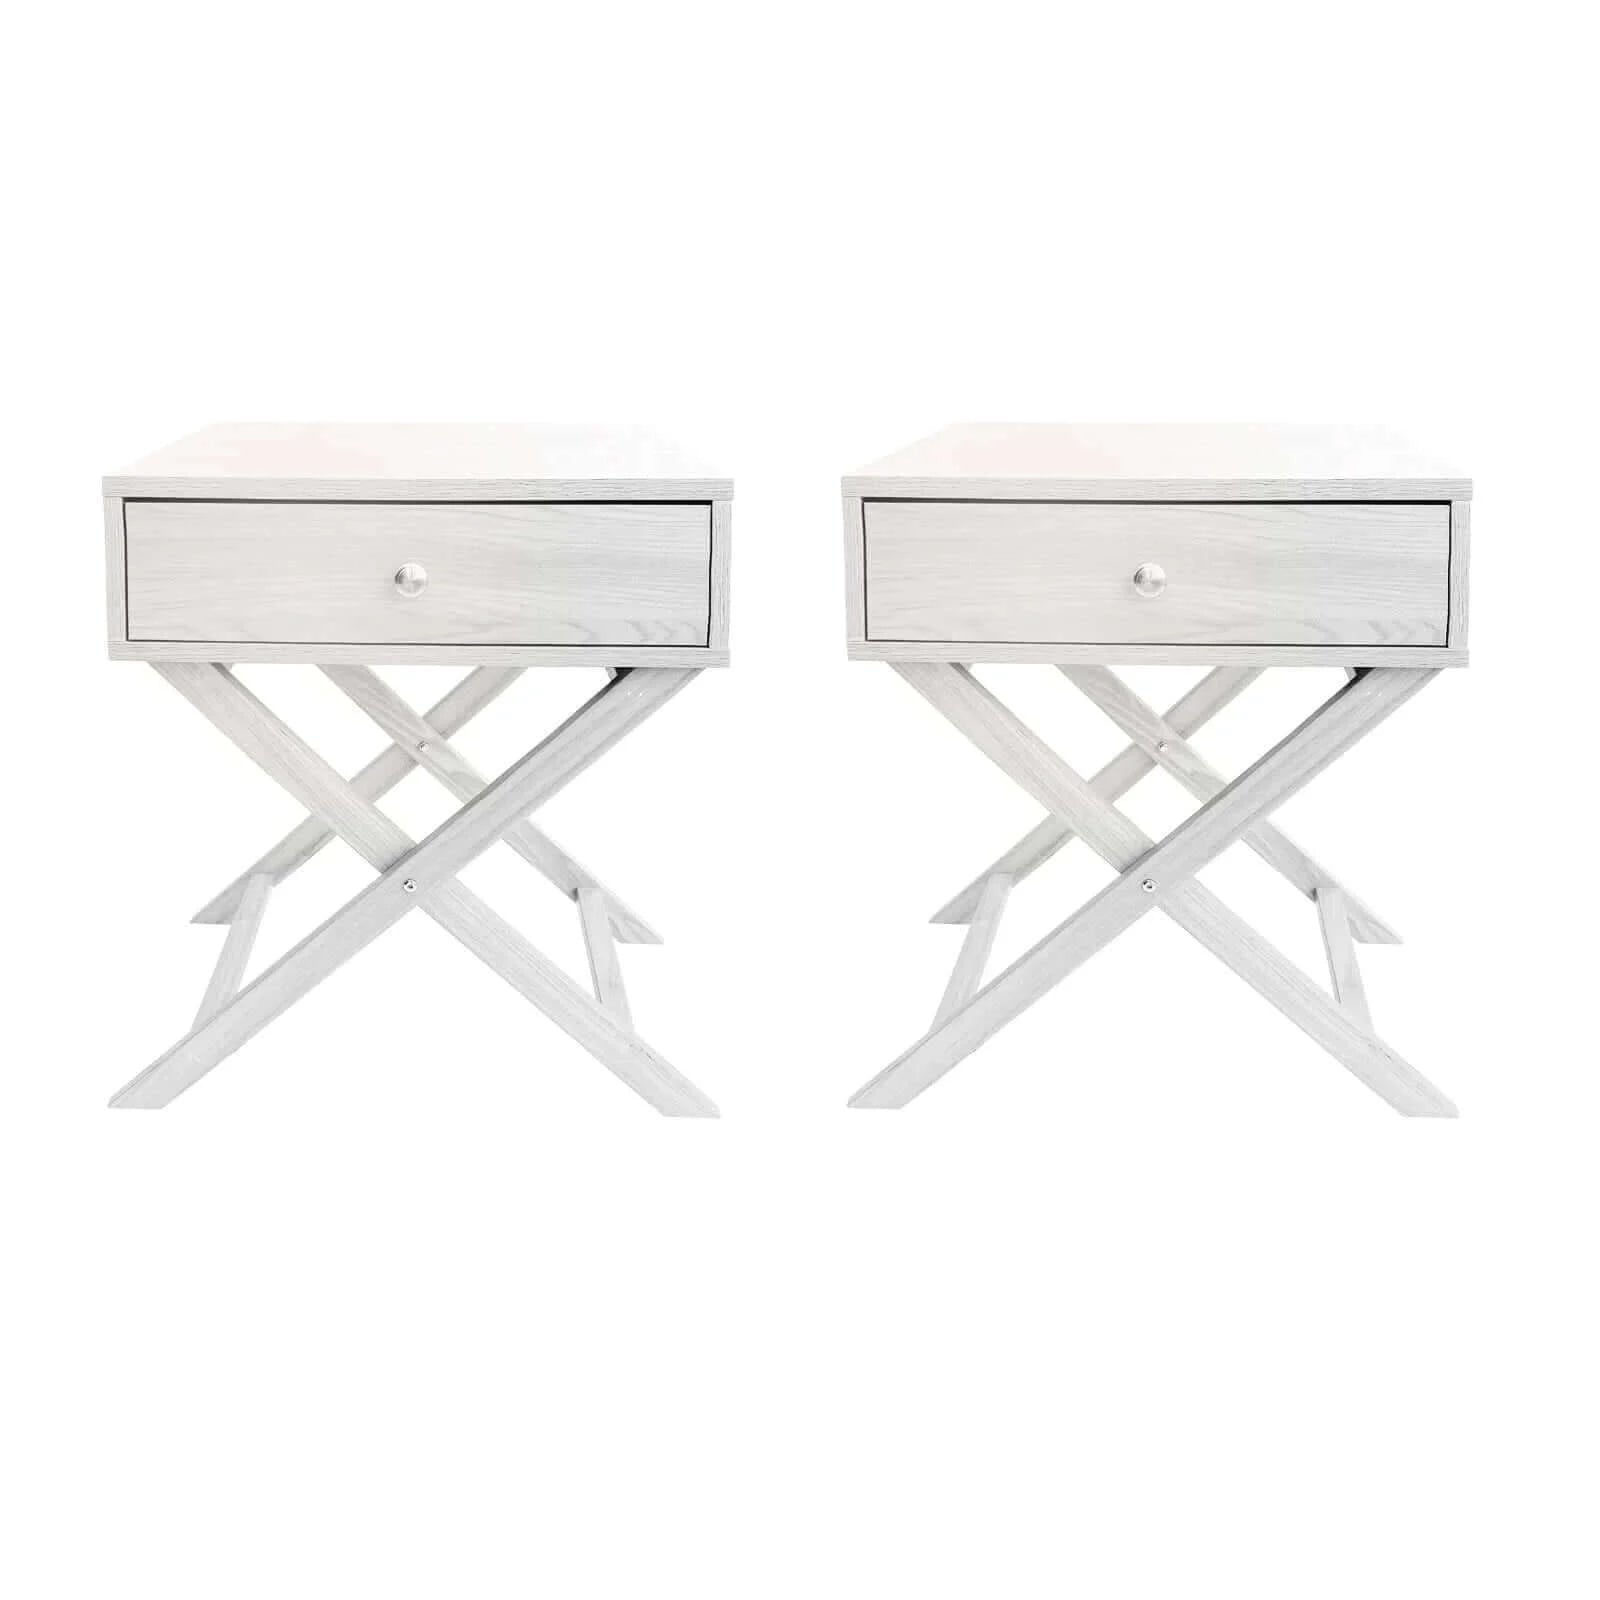 Milano Decor Bedside Table Surry Hills White Storage Cabinet Bedroom - Two Pack - White-Upinteriors